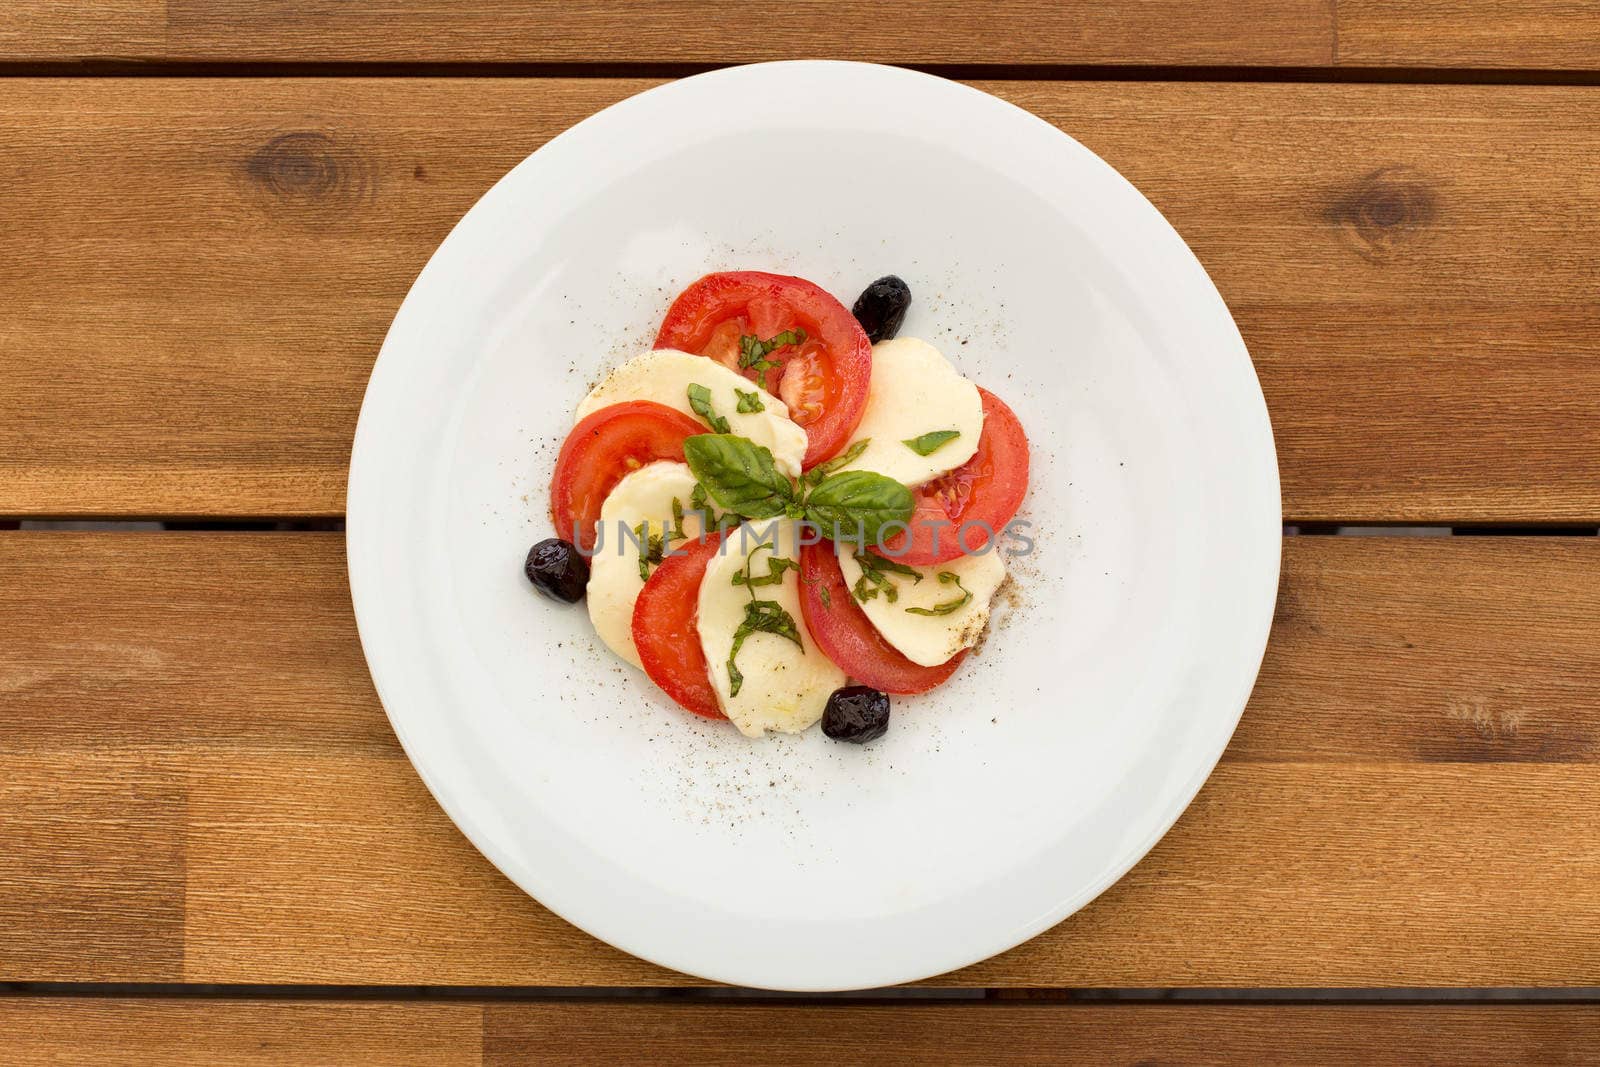 Tomatoes and mozzarella salad in white plate on a wooden table.